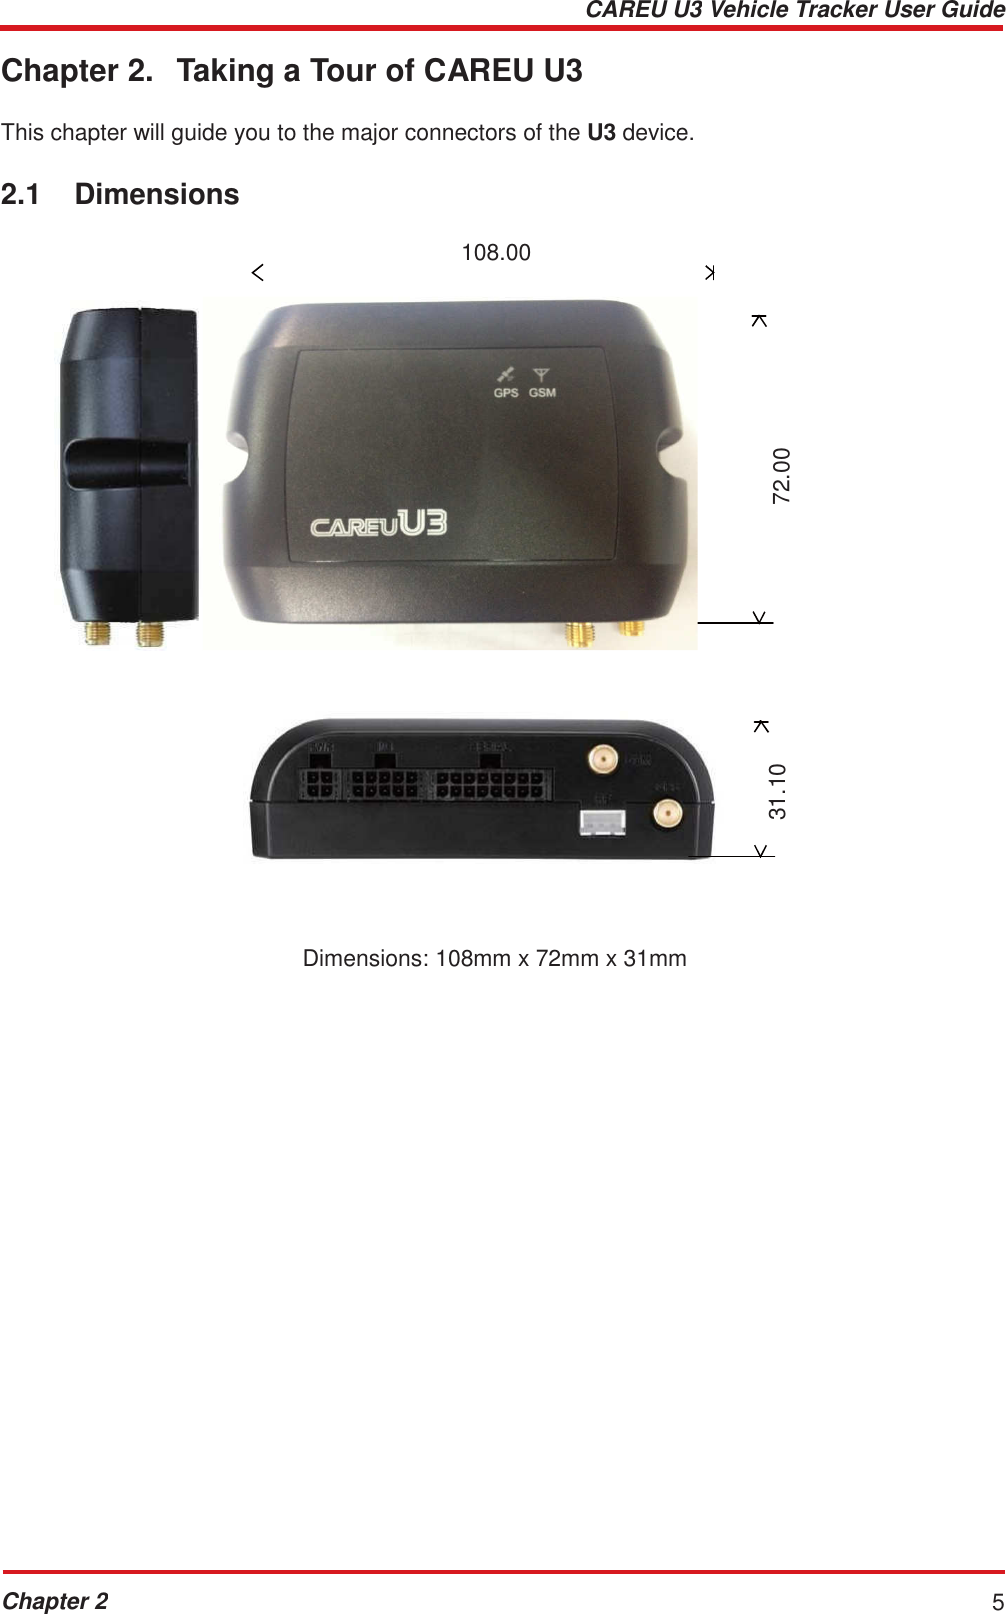 CAREU U3 Vehicle Tracker User Guide Chapter 2 5    31.10 72.00  Chapter 2.  Taking a Tour of CAREU U3   This chapter will guide you to the major connectors of the U3 device.   2.1  Dimensions  108.00                  Dimensions: 108mm x 72mm x 31mm 